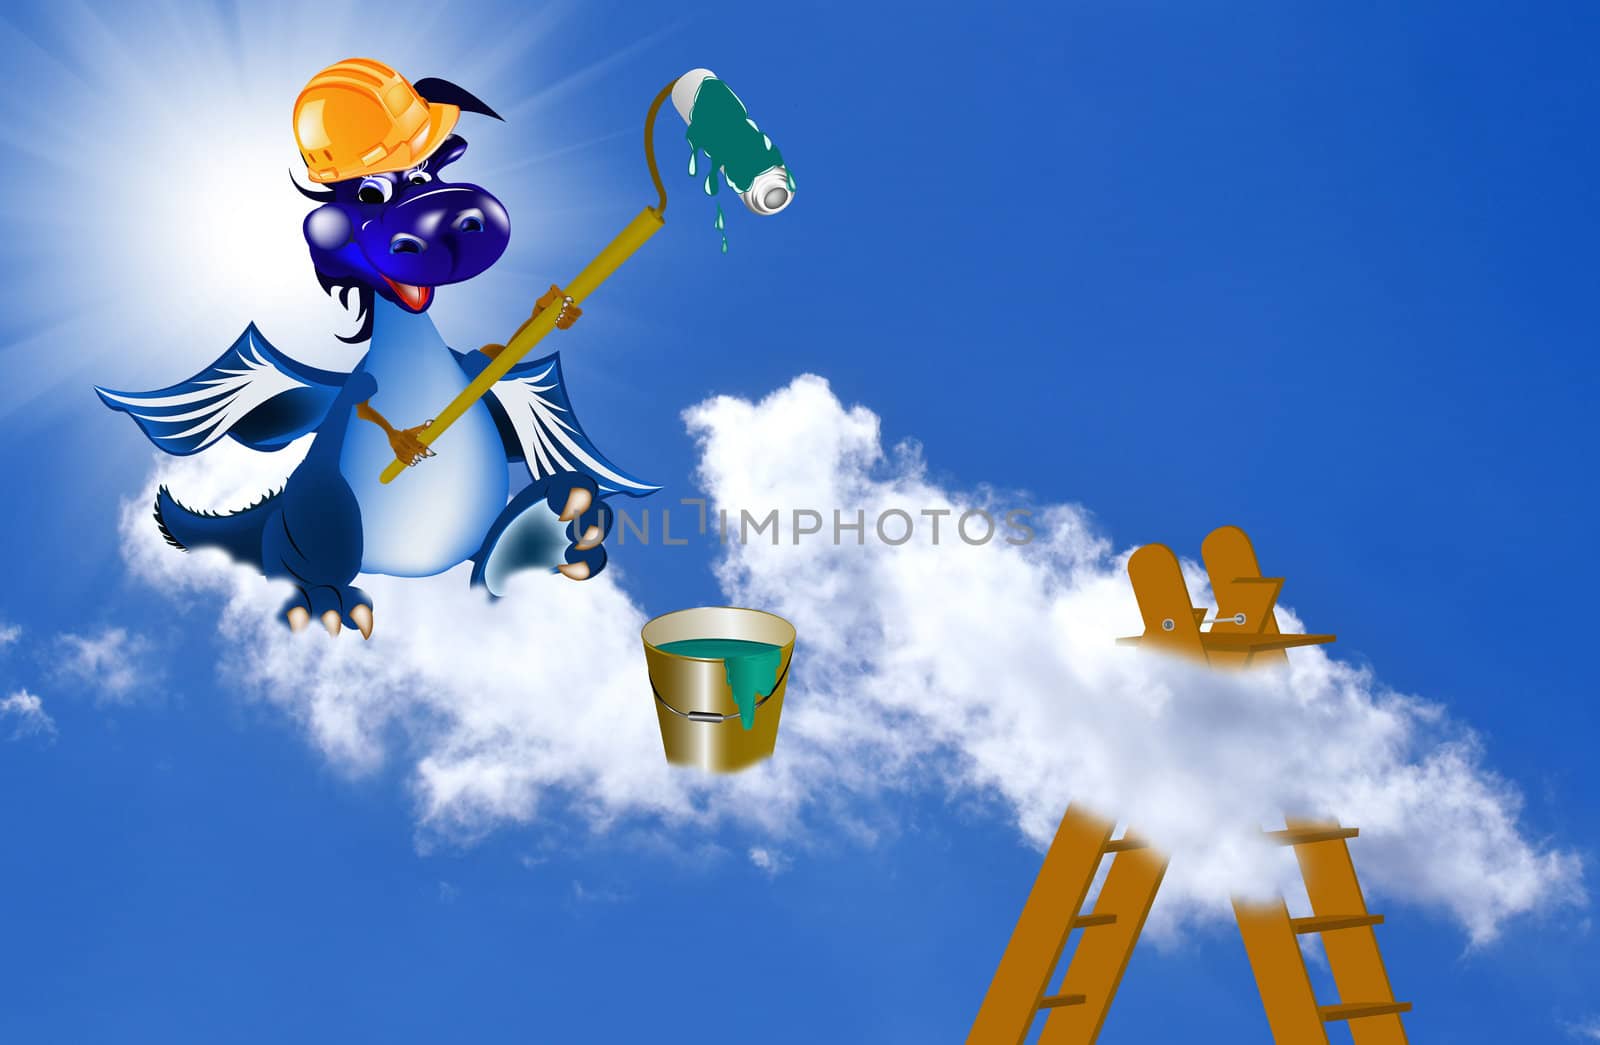 The New Year's Dark blue Dragon carries out any is repair-civil work for creation of a cosiness of your house in new 2012